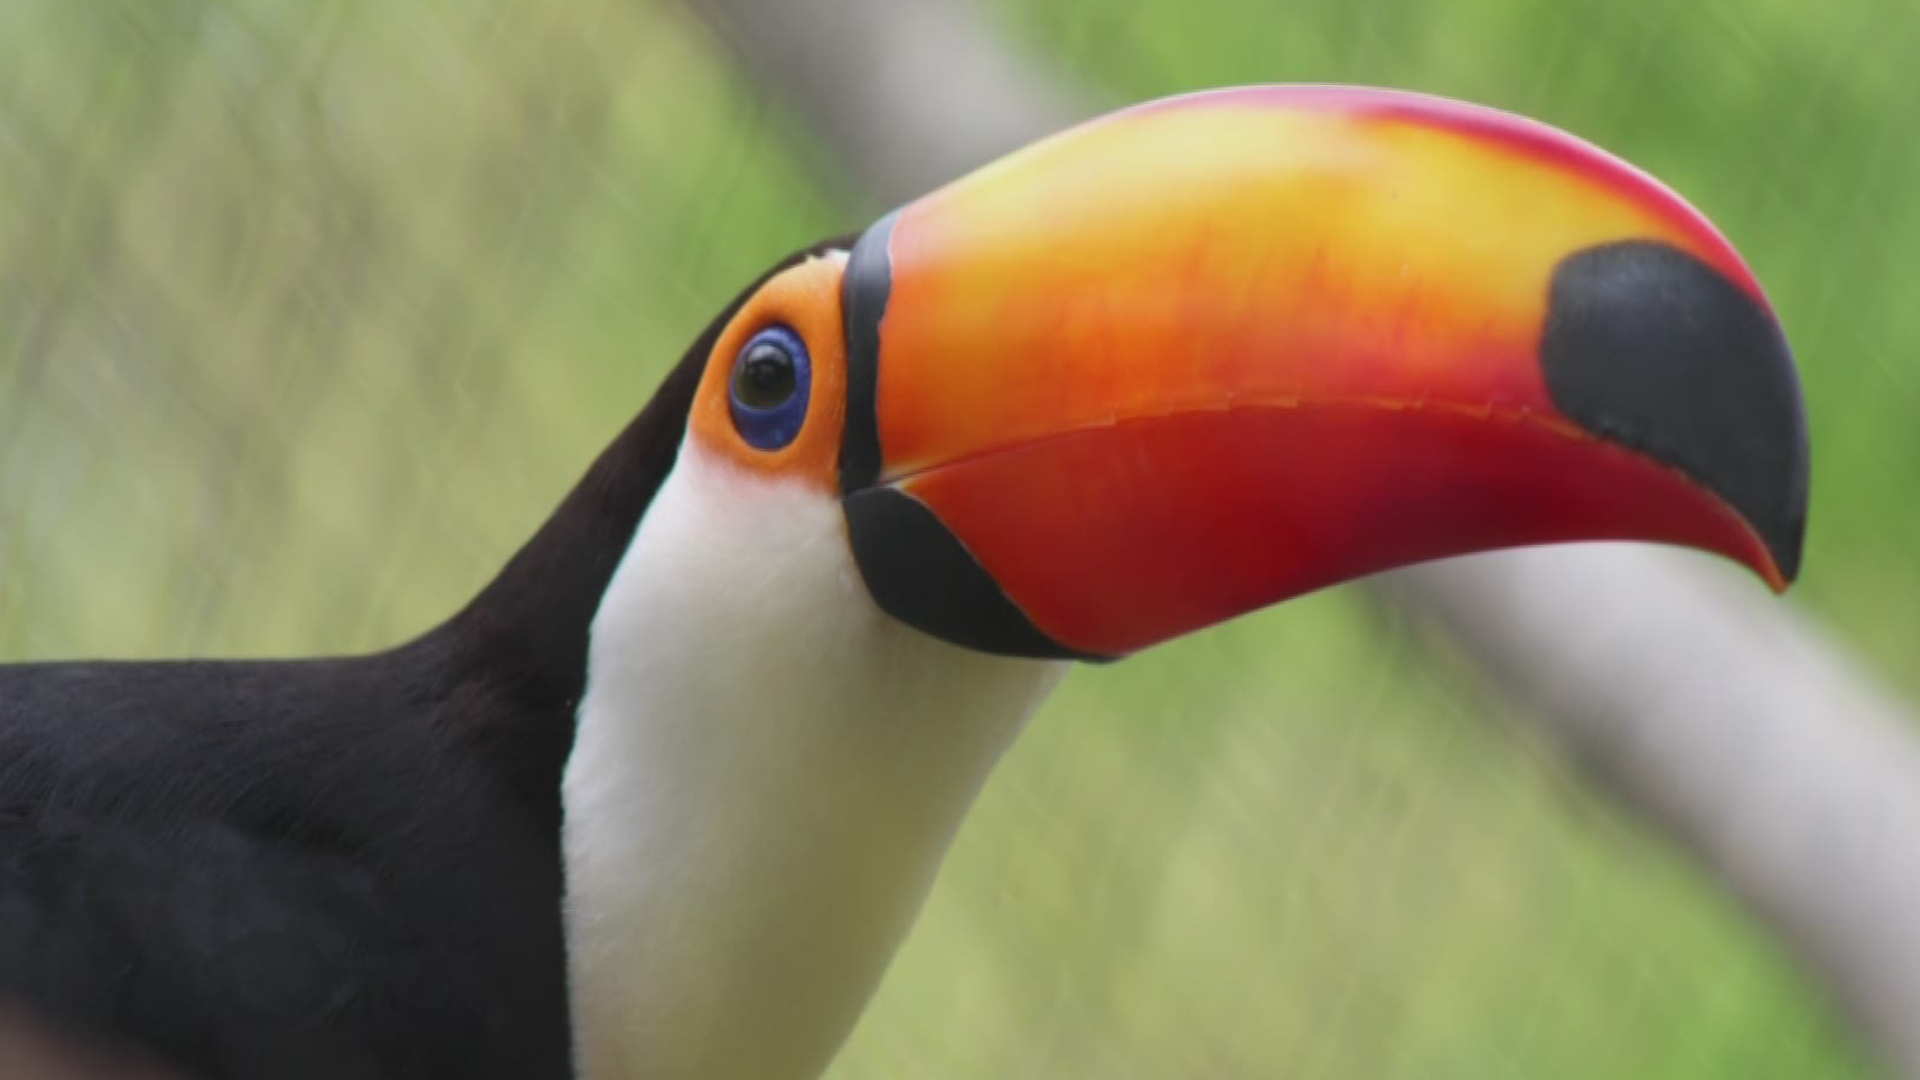 While neither of them are Sam the Toucan, the John Ball Zoo announced the arrival of two new Toco Toucans.